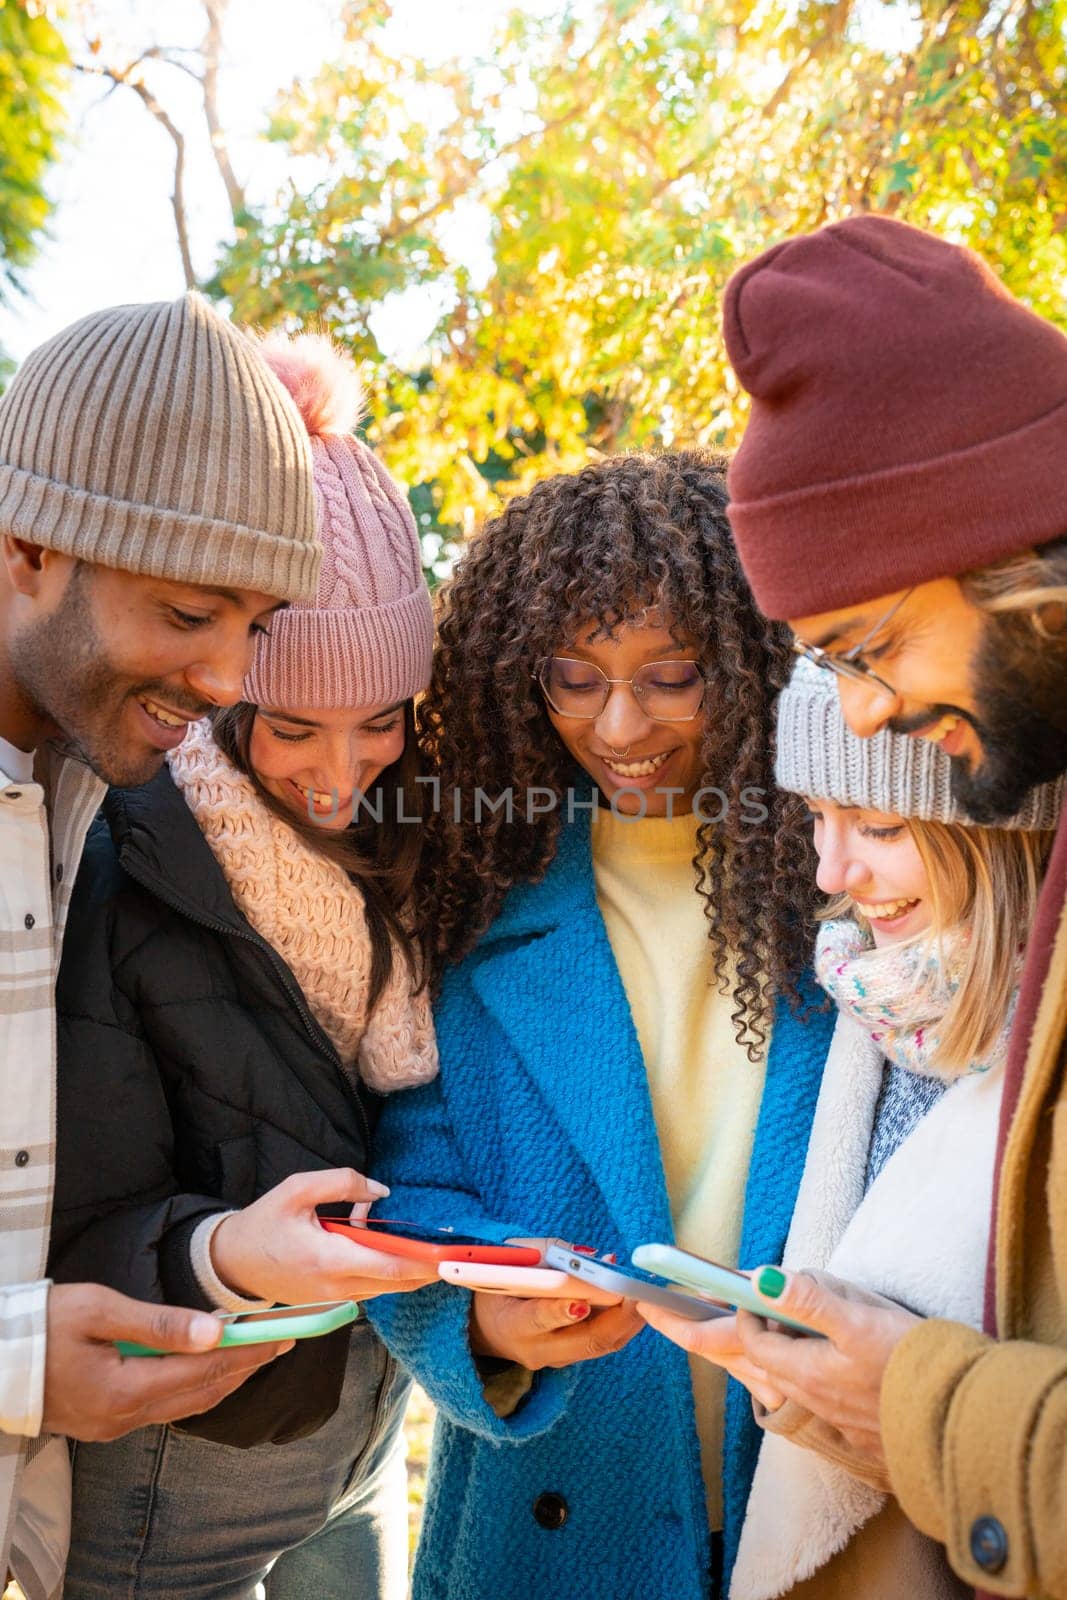 Low angle view of a group of young teenagers friends using cell phones. Concept of community millennial people addicted to technology. Social Media communication generation Z